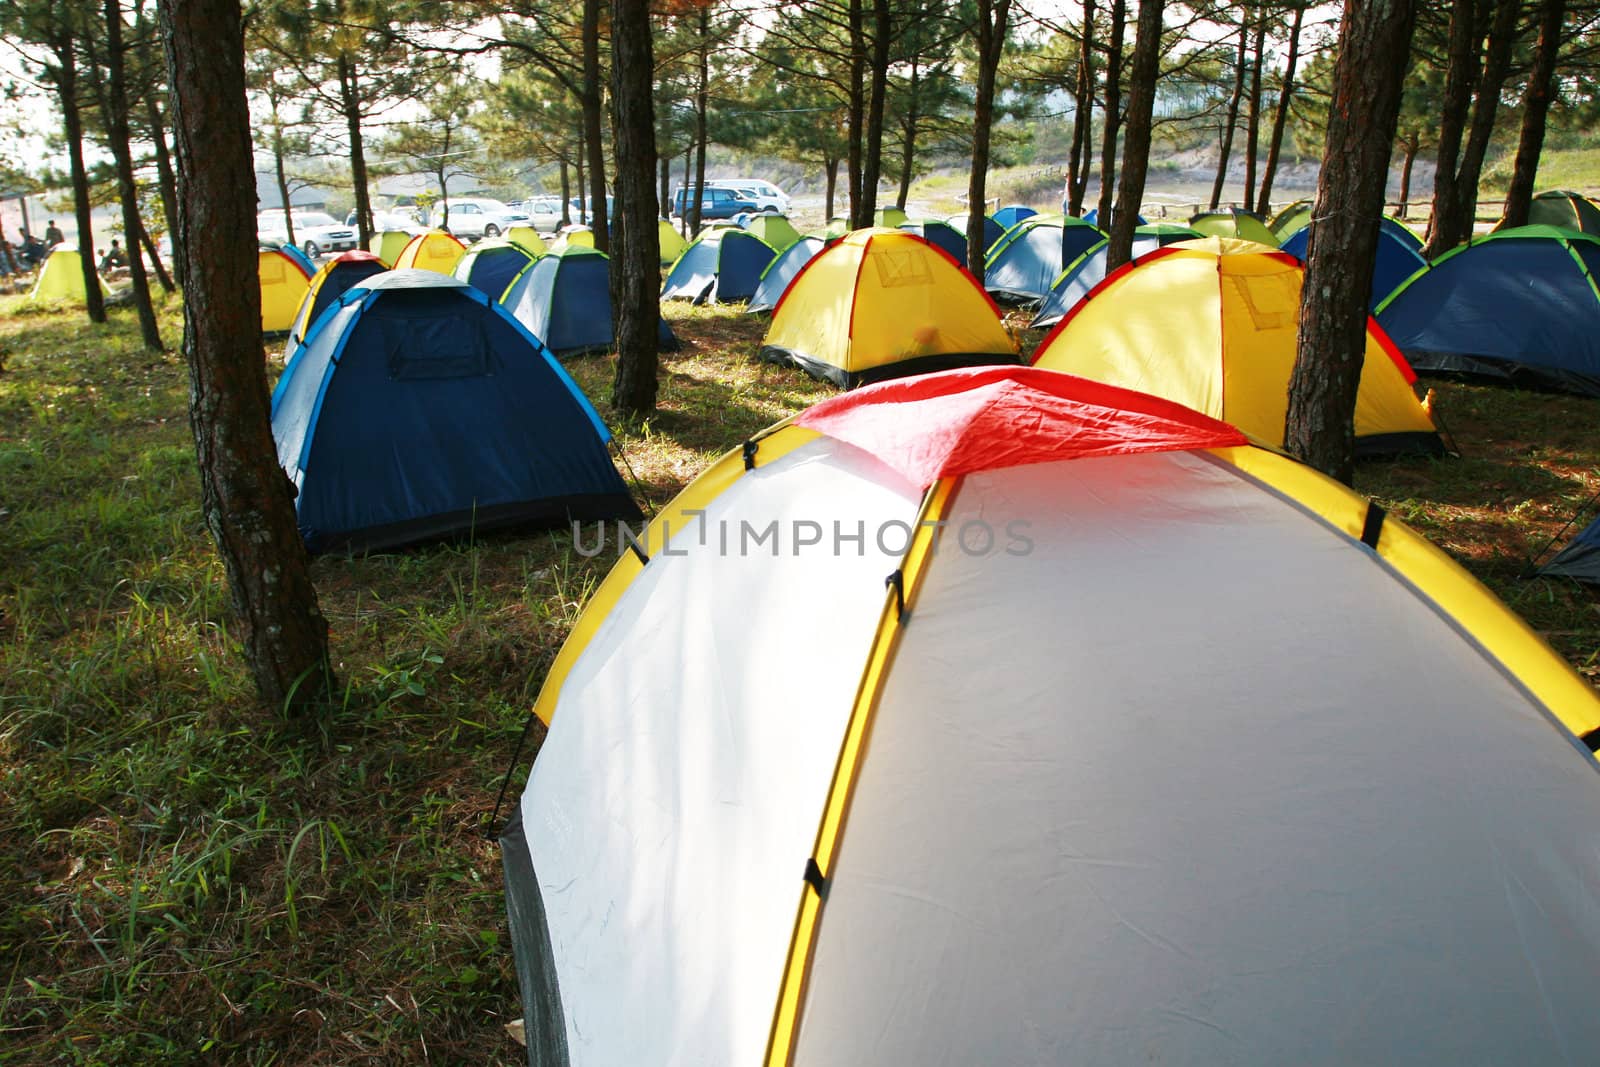 A group of tents in the pine forest